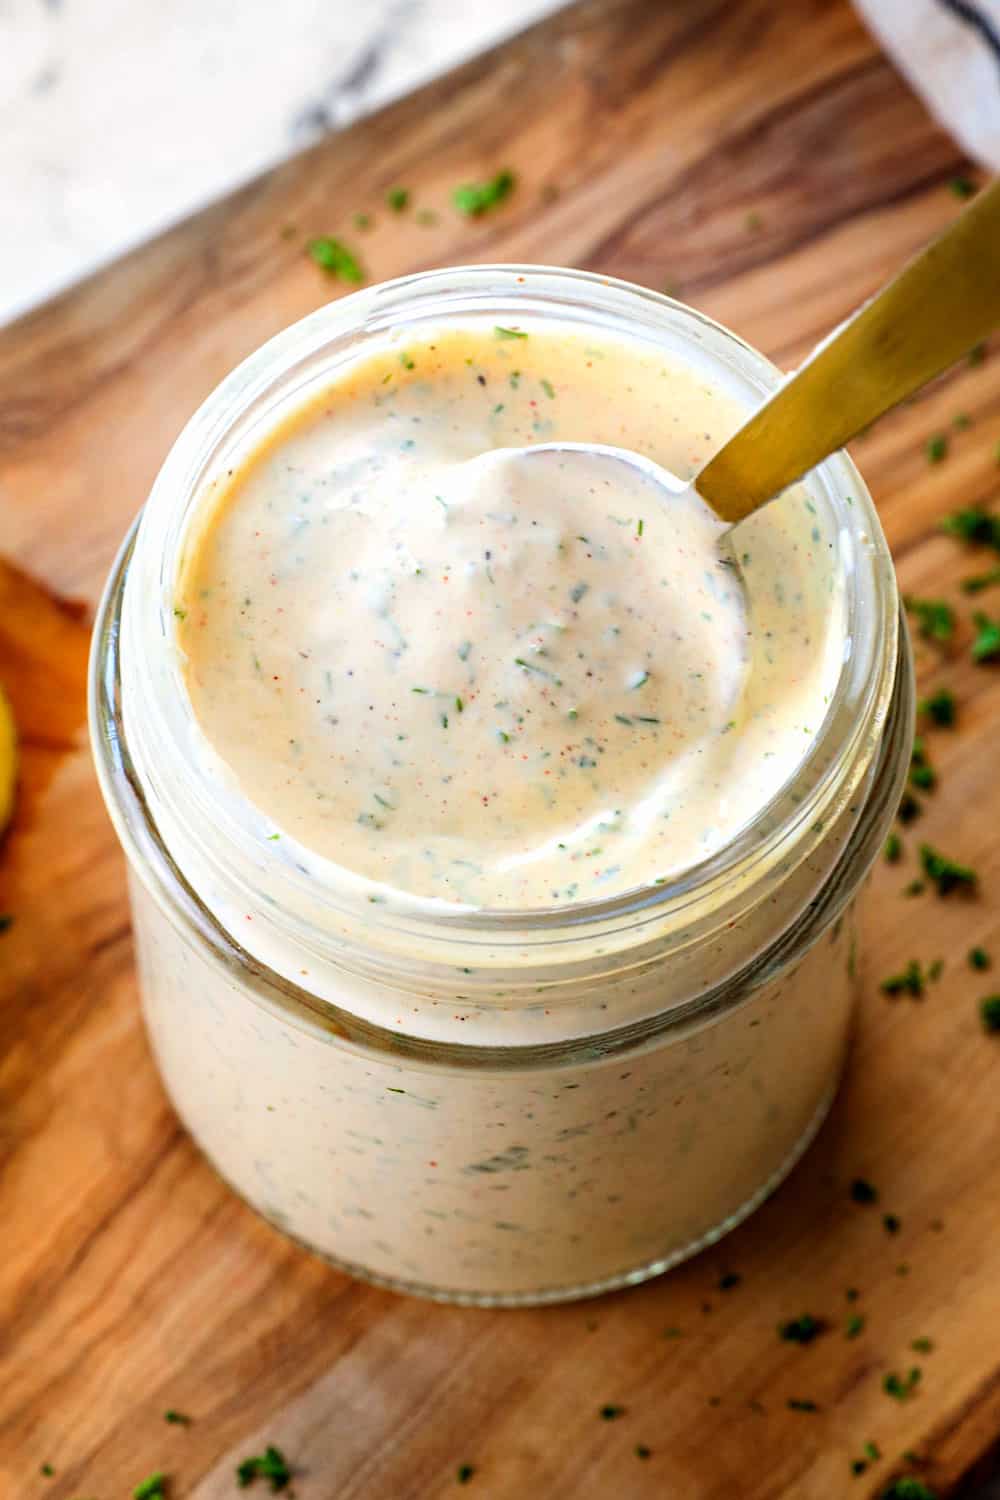 spooning up homemade ranch dressing showing how creamy it is